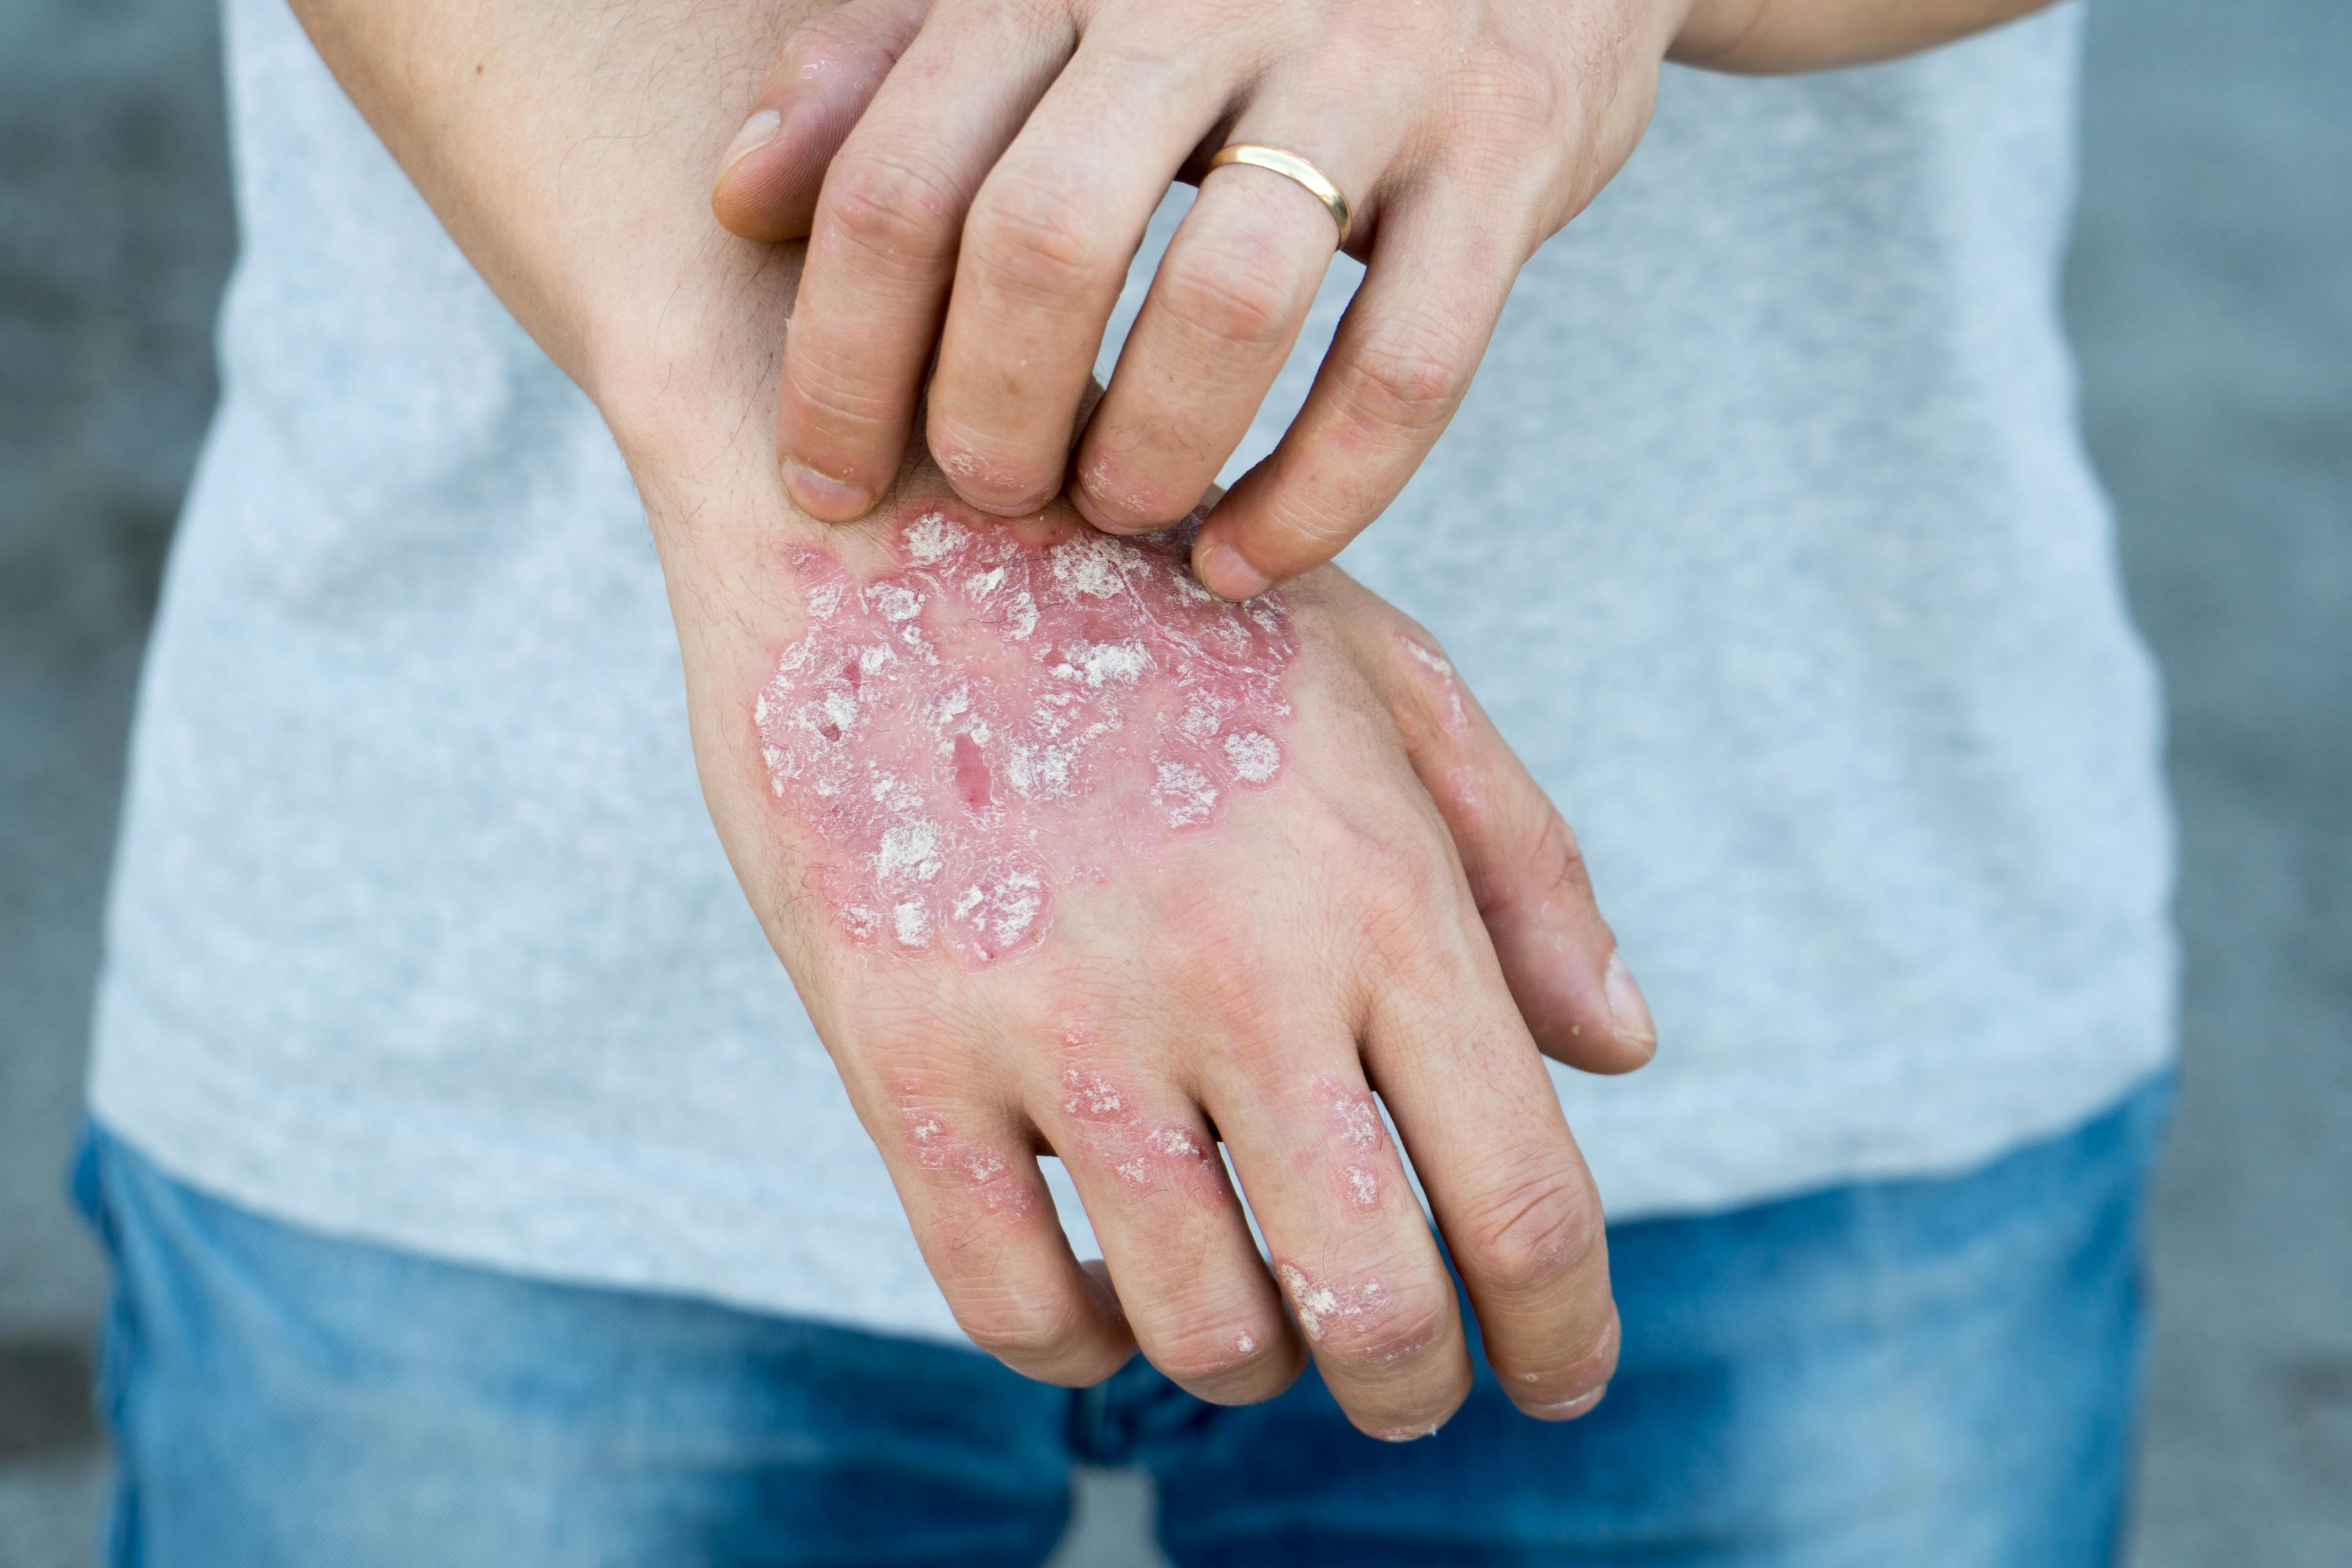 Newest Psoriasis Treatment is Now Available